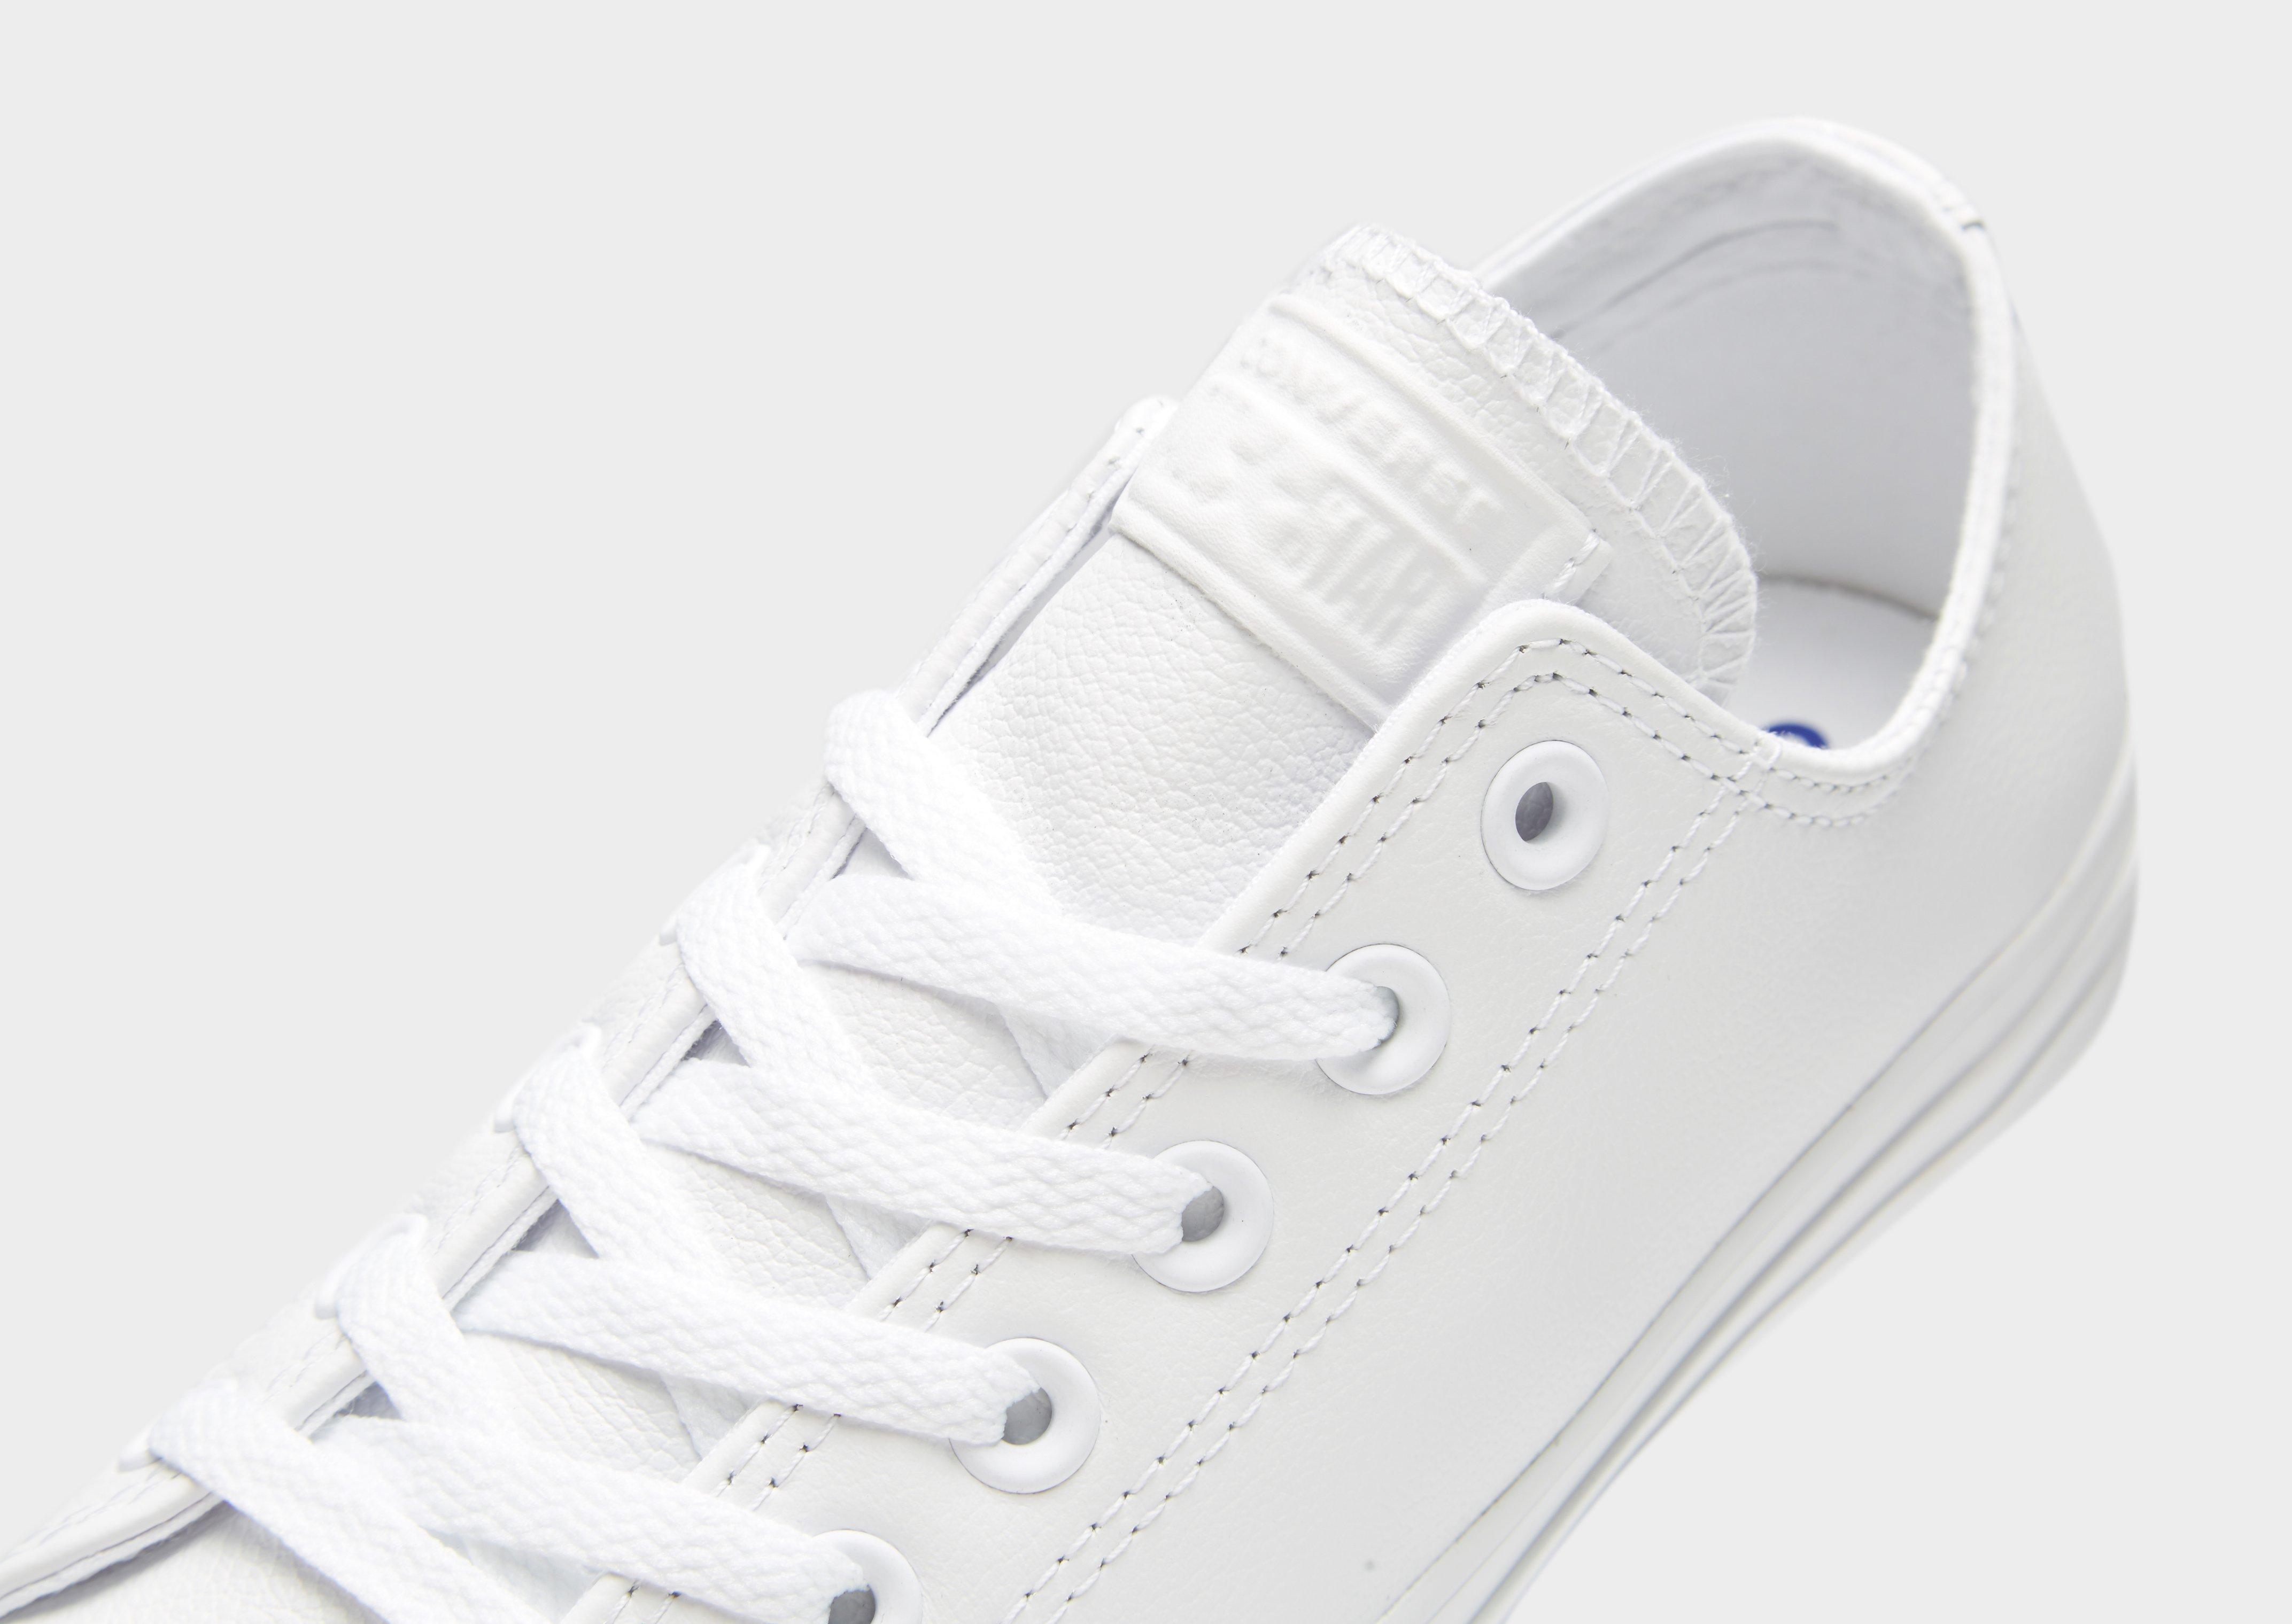 converse all star leather ox para mujer